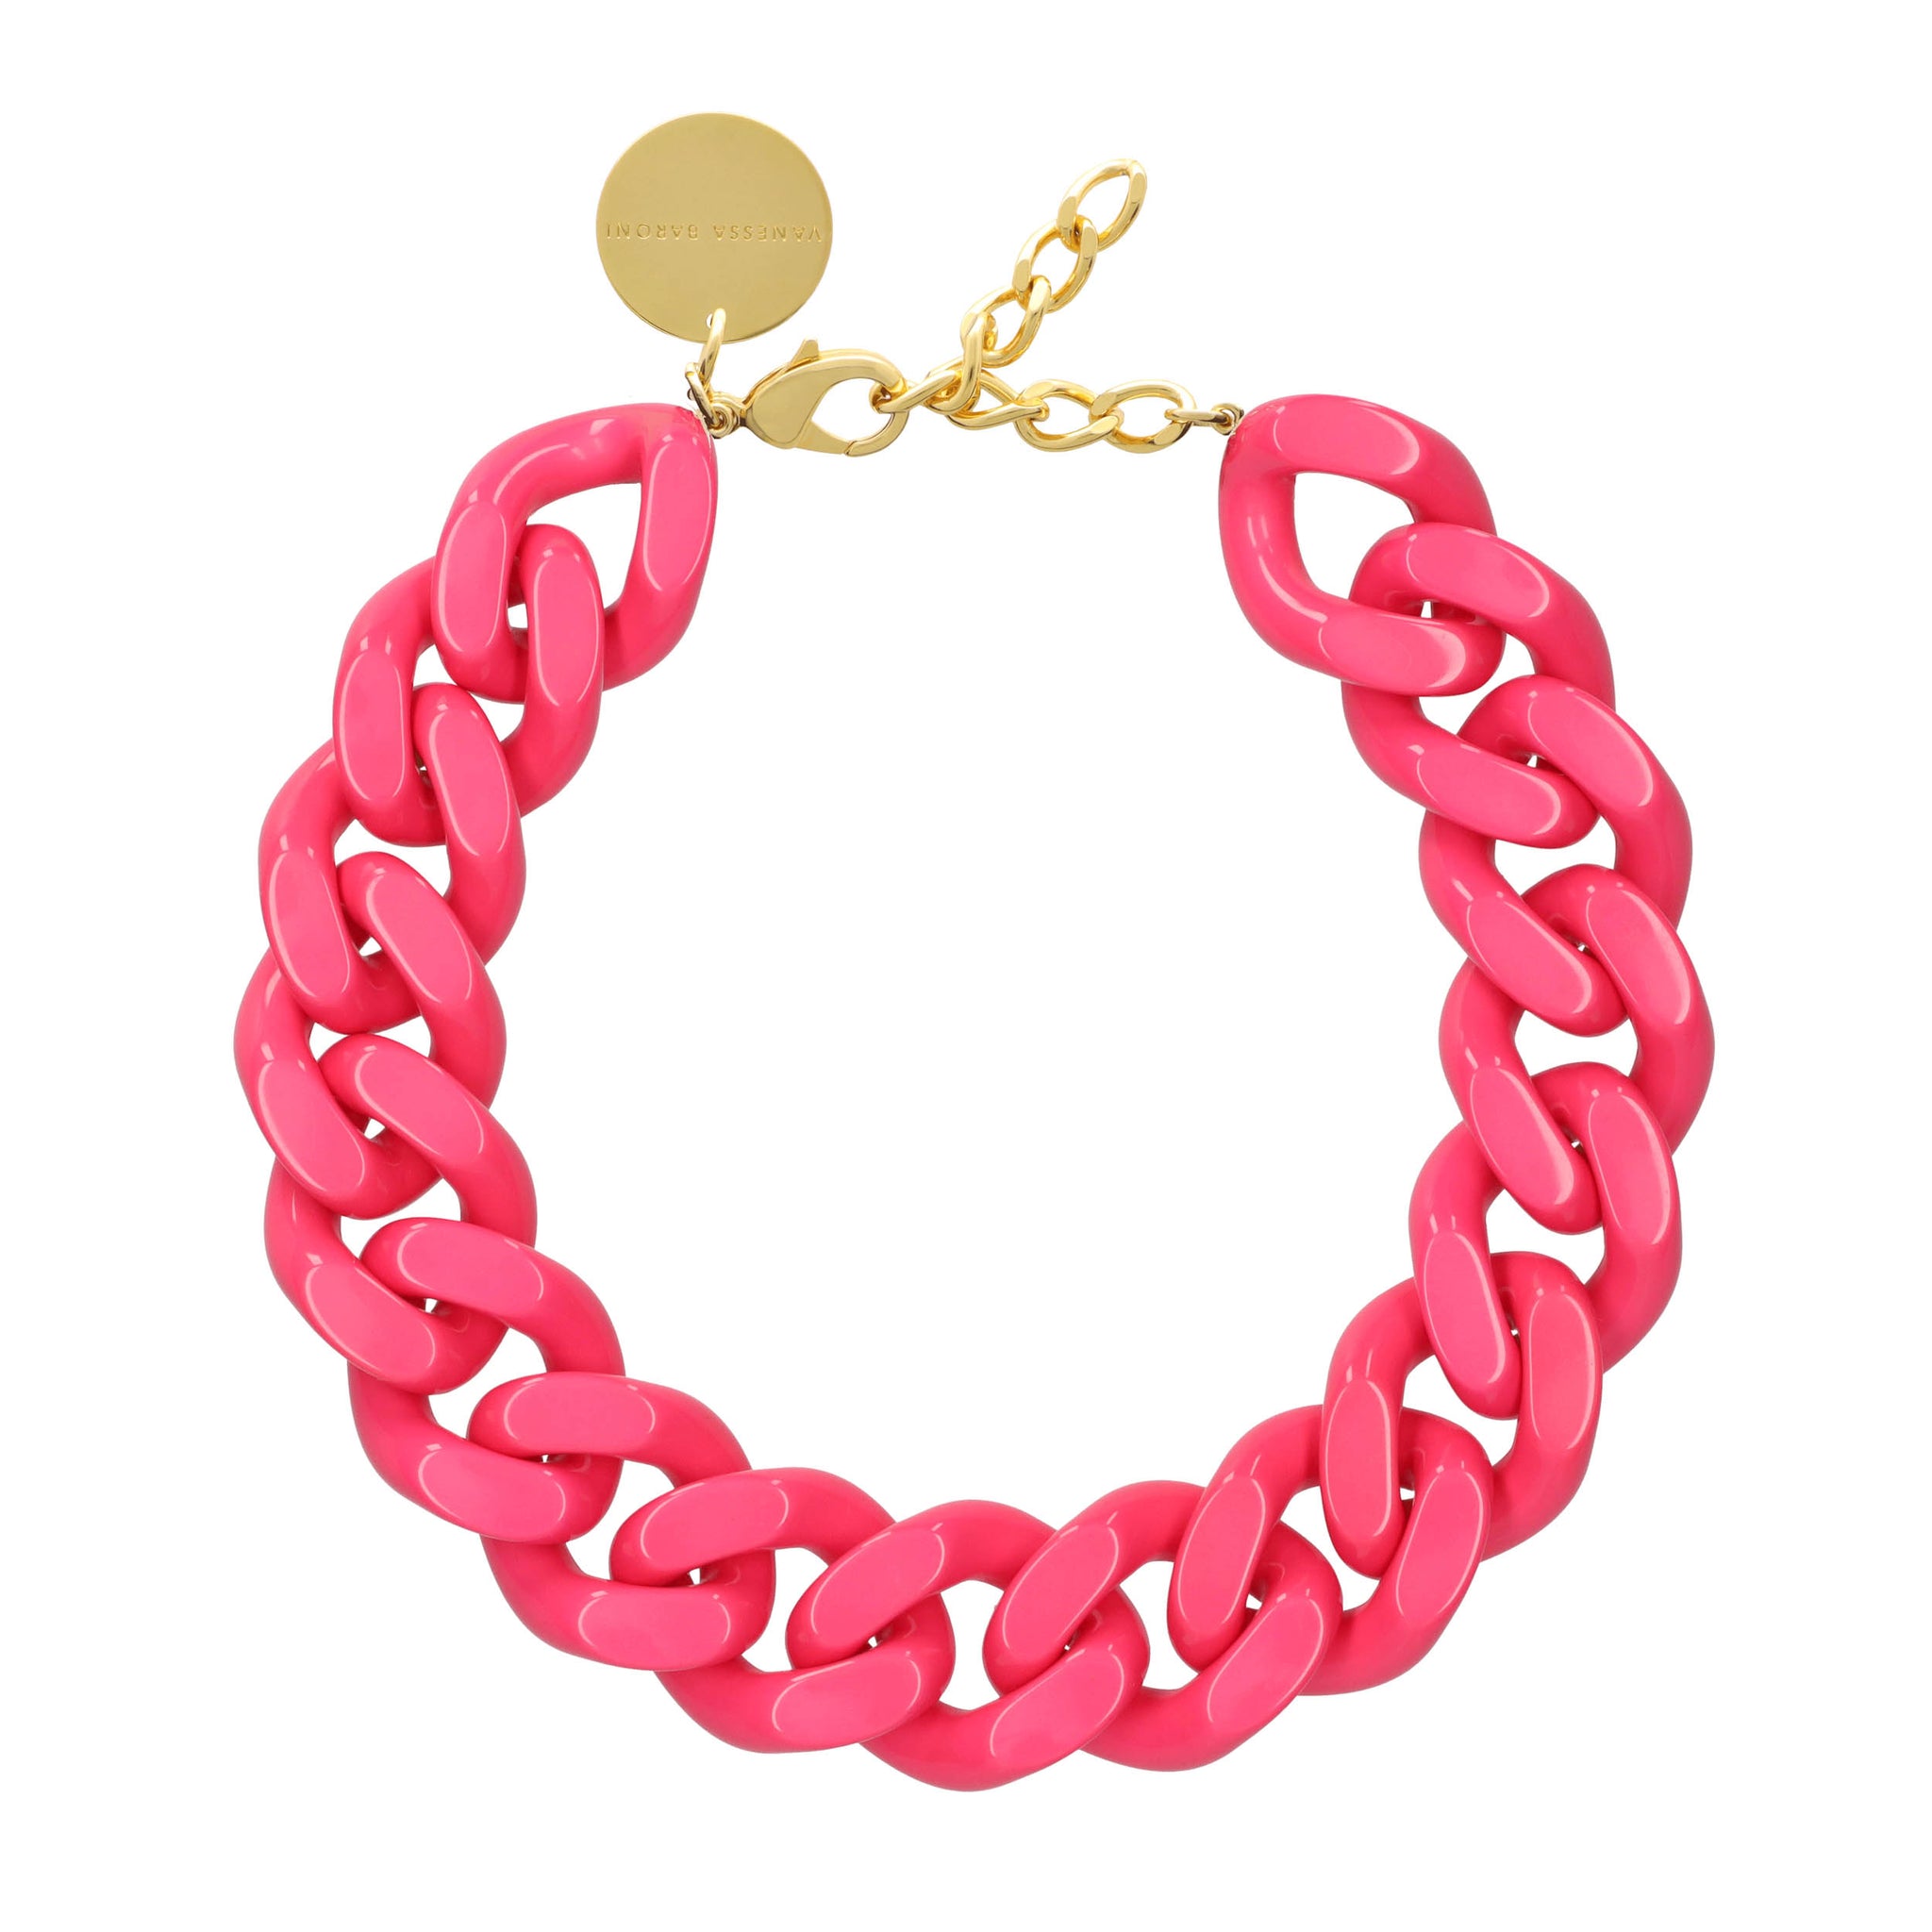 Pink Chunky Chain Necklace, Chain Link Statement Necklace